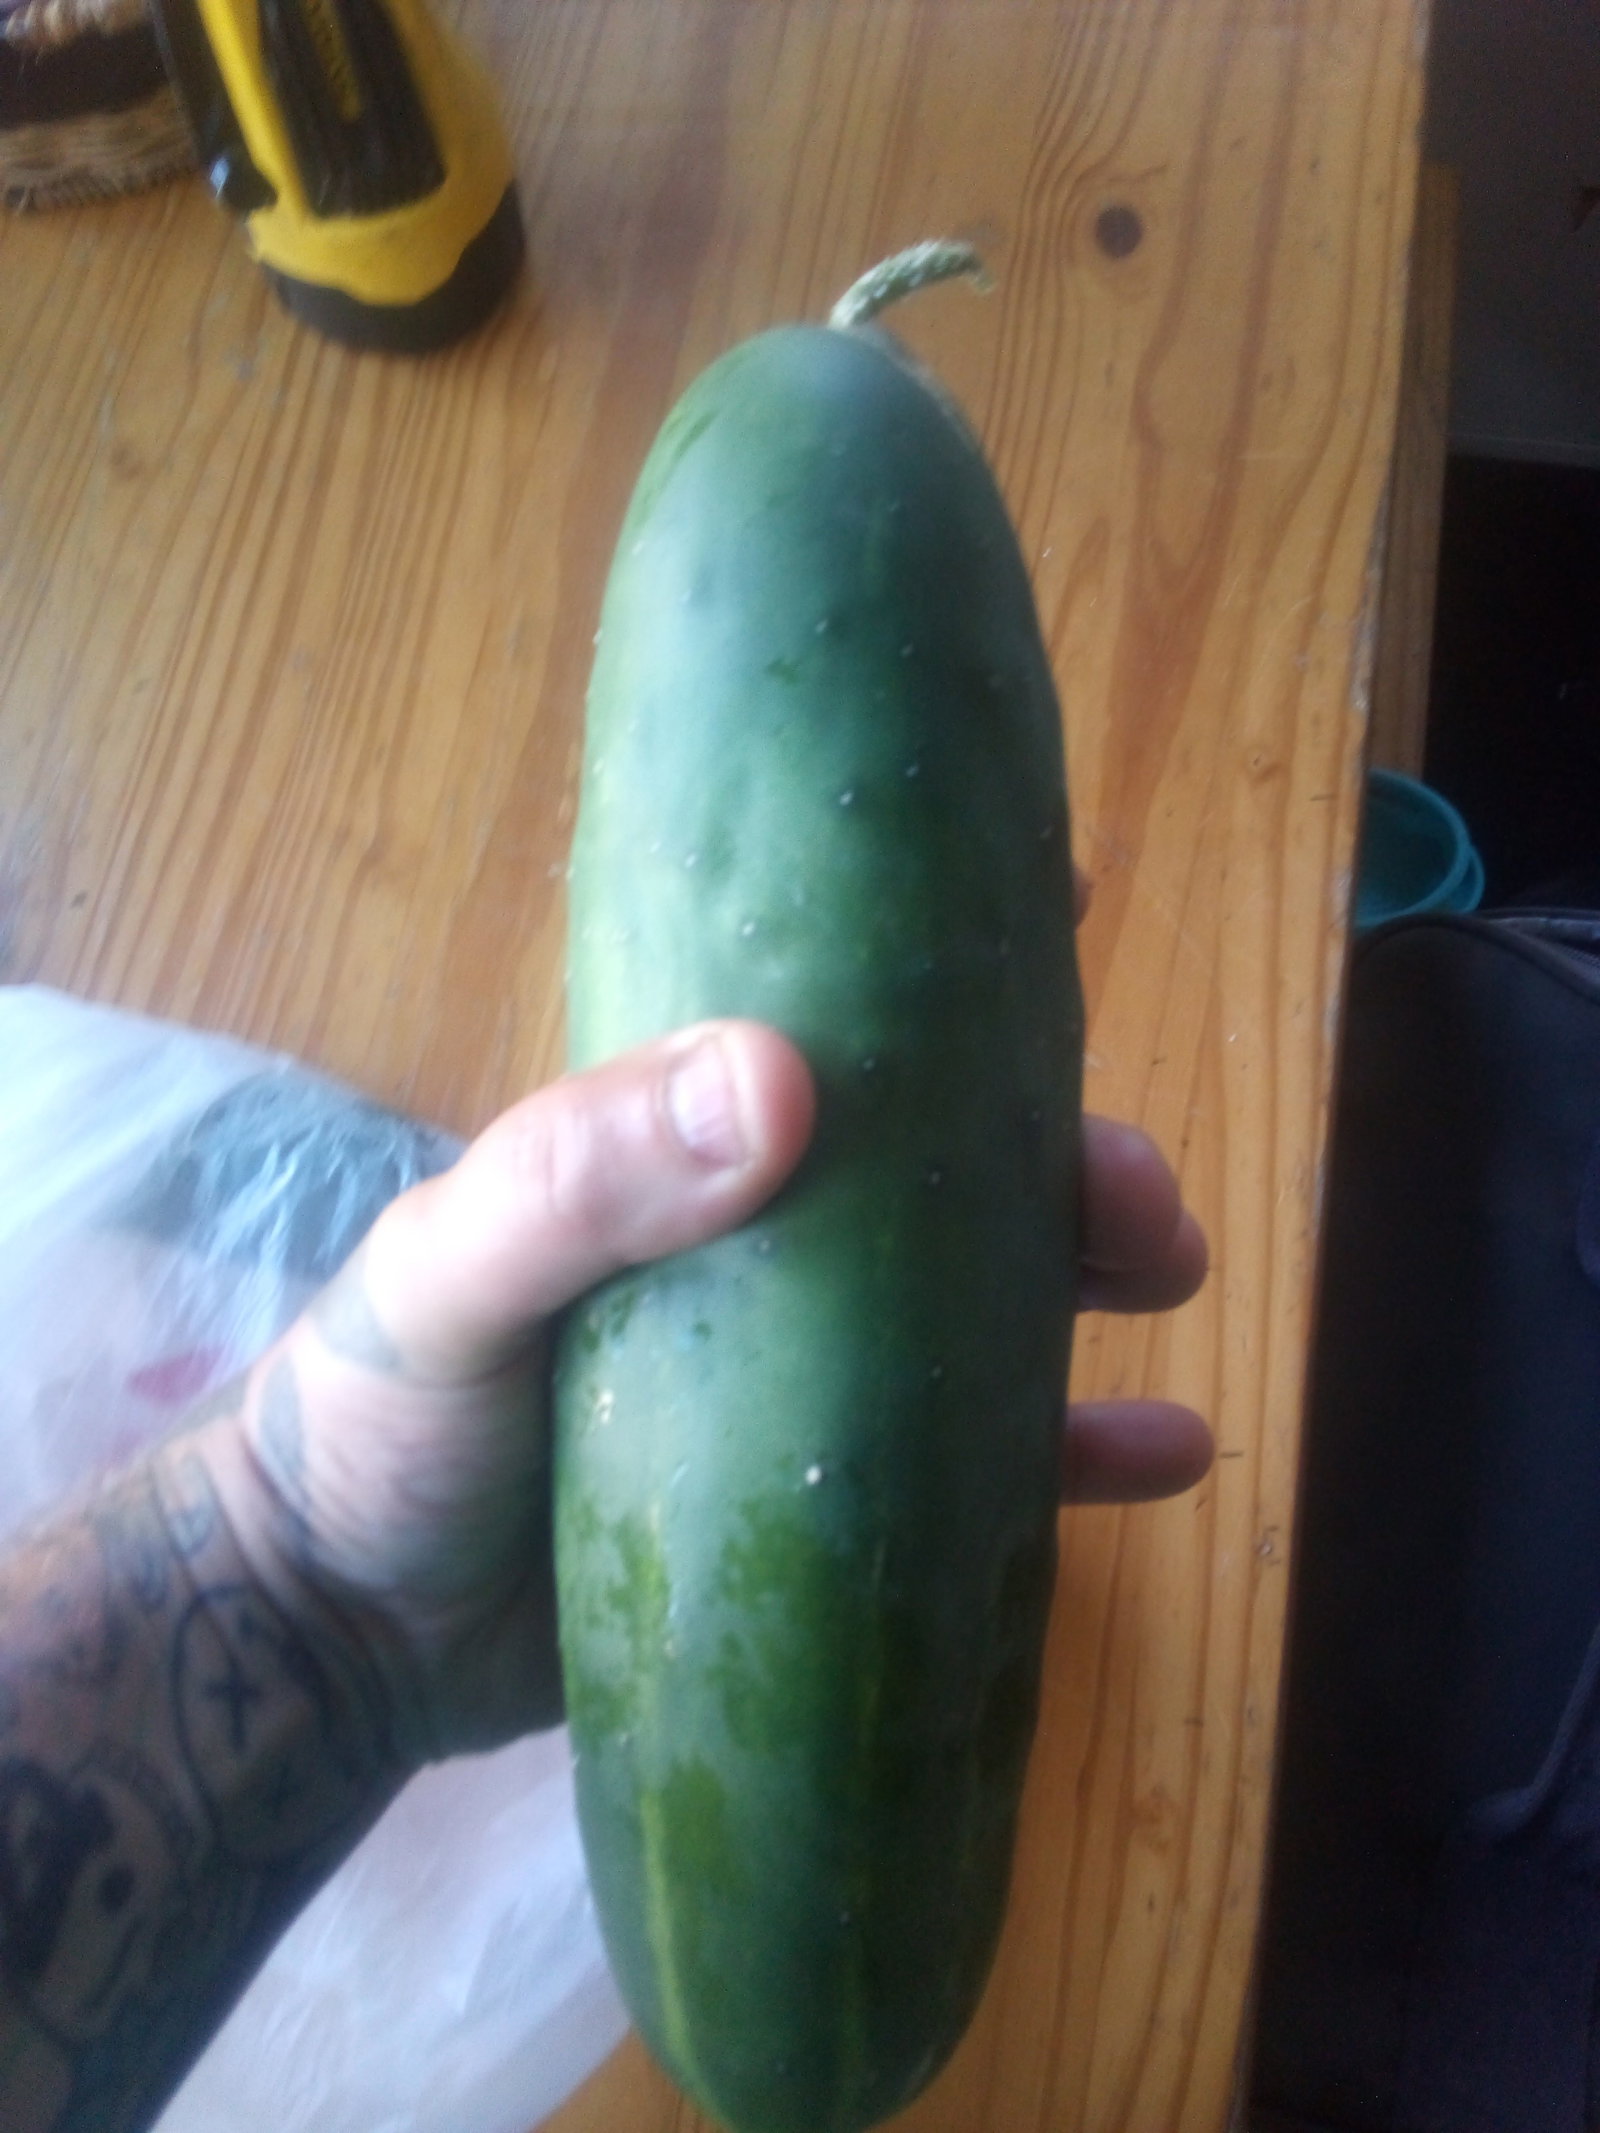 Photo by Slut wife and friend with the username @Tank85,  August 9, 2019 at 9:49 AM. The post is about the topic Pussy and the text says 'wife tried to fit this monster cucumber in her pussy'